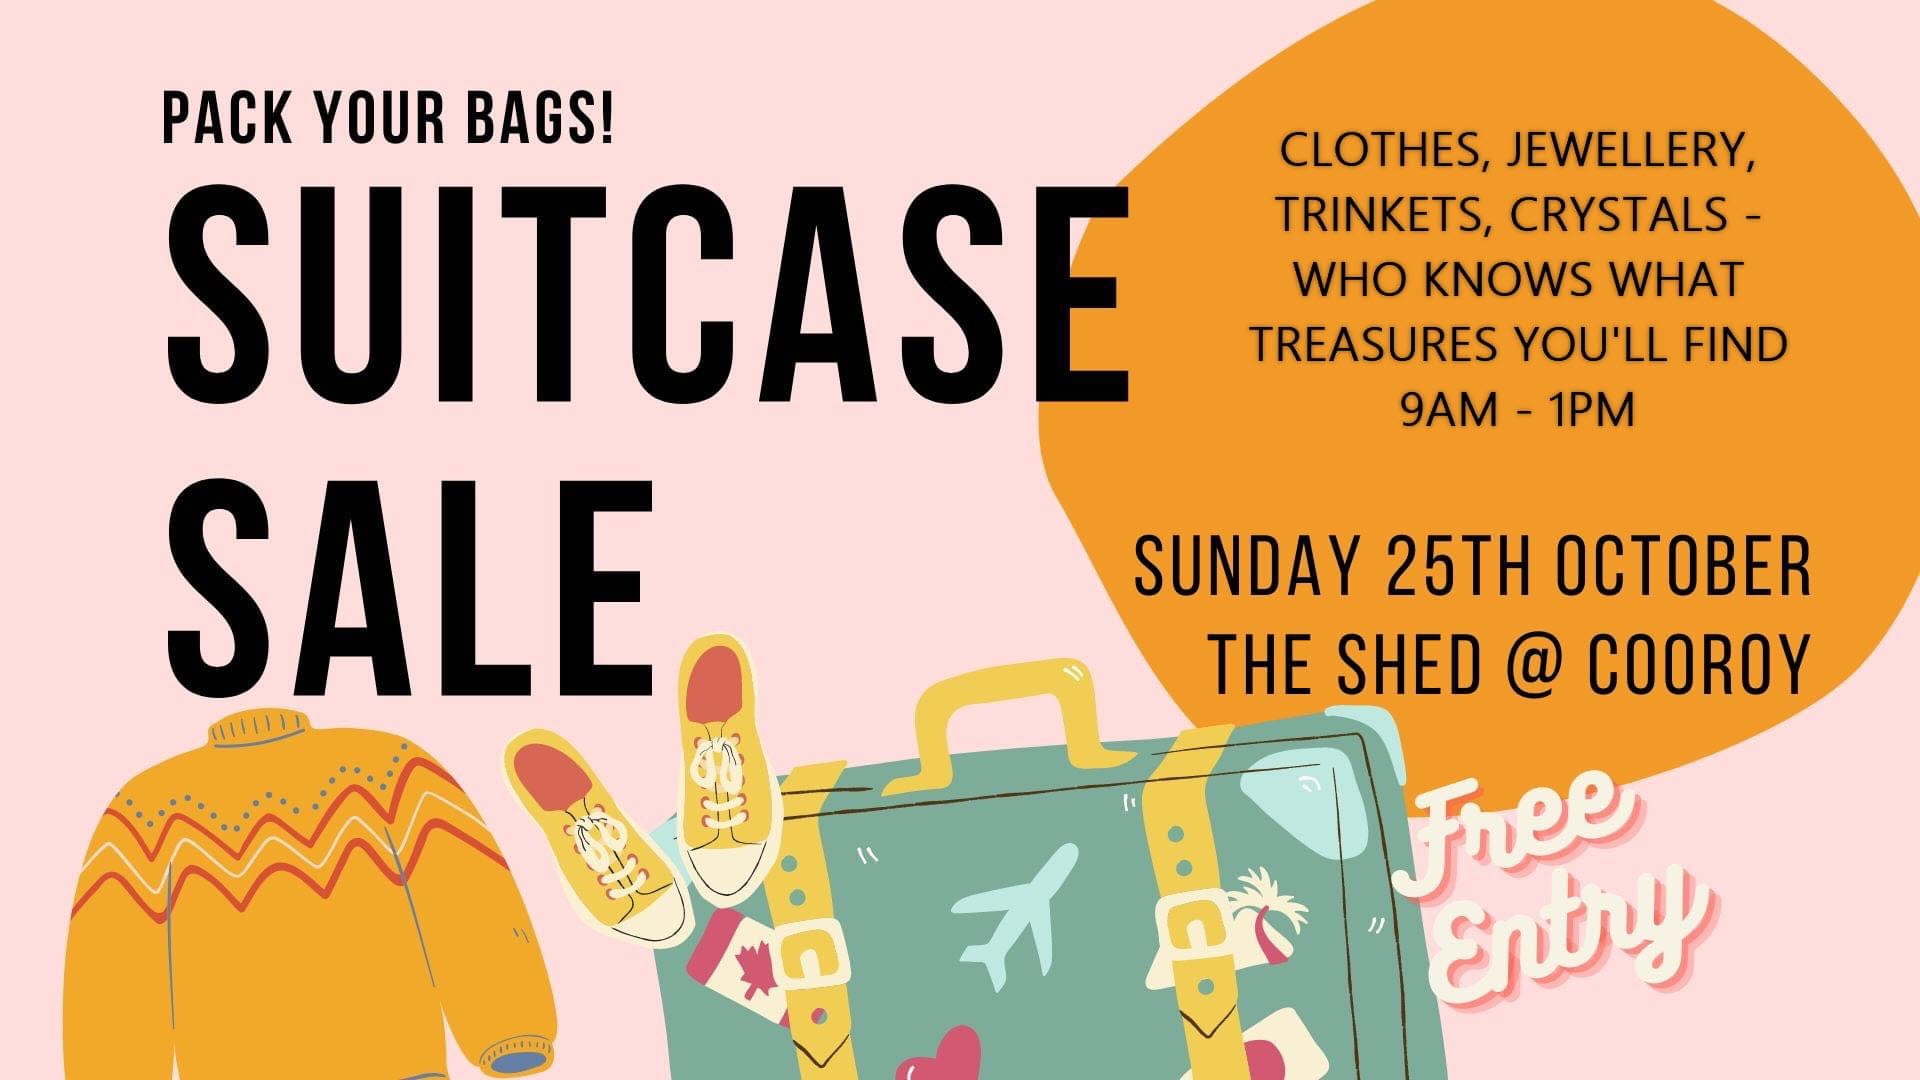 Suitcase sale at The Shed at Cooroy